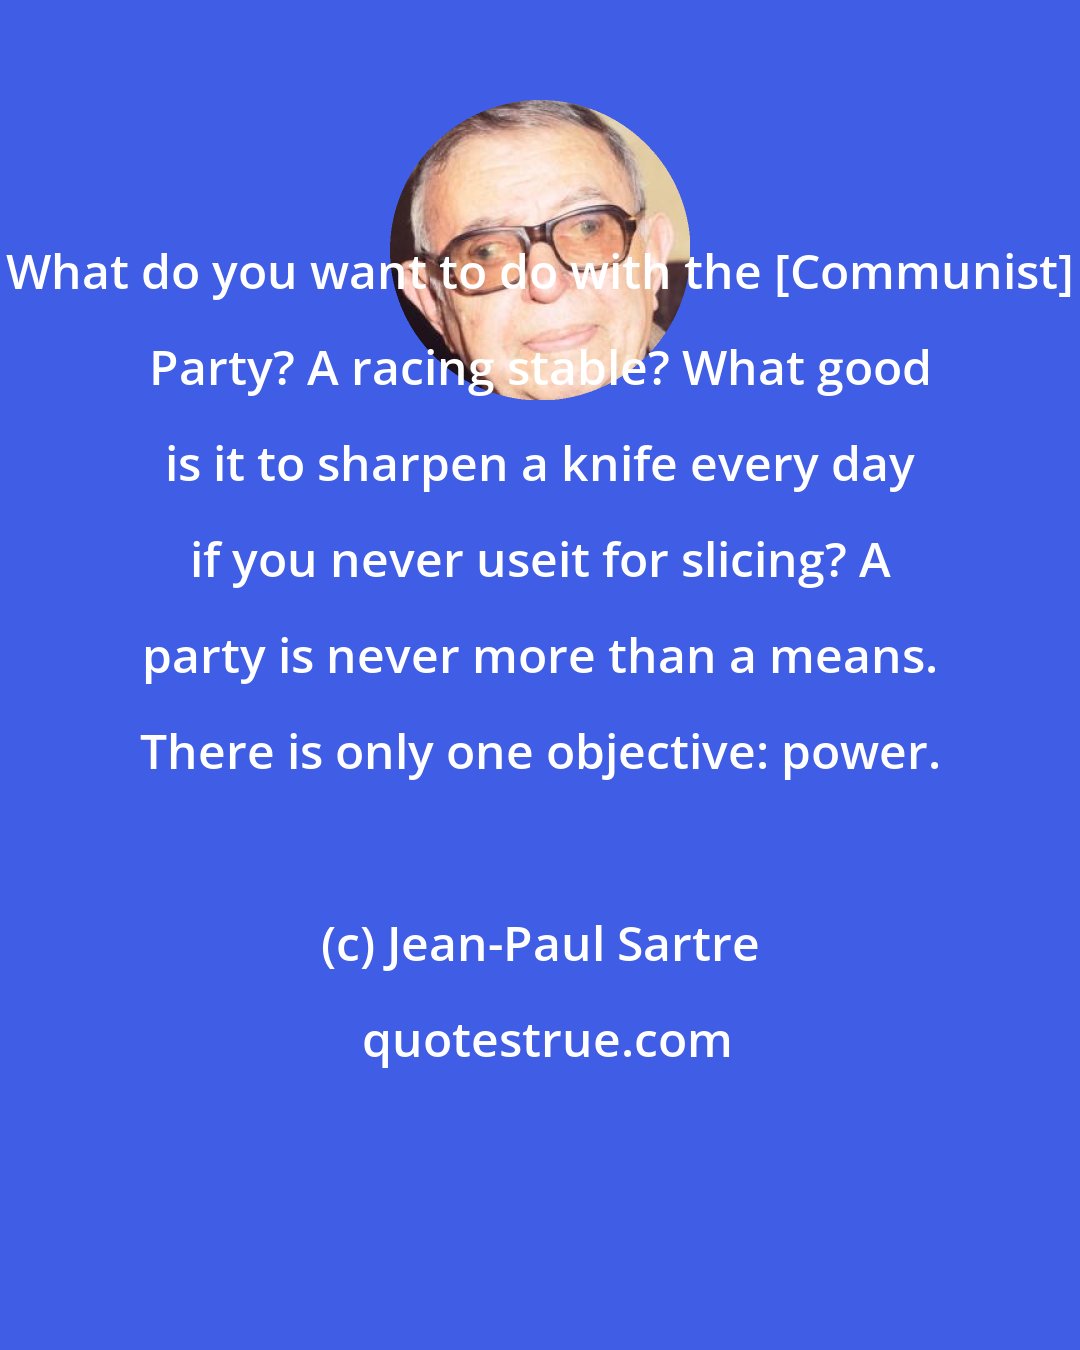 Jean-Paul Sartre: What do you want to do with the [Communist] Party? A racing stable? What good is it to sharpen a knife every day if you never useit for slicing? A party is never more than a means. There is only one objective: power.